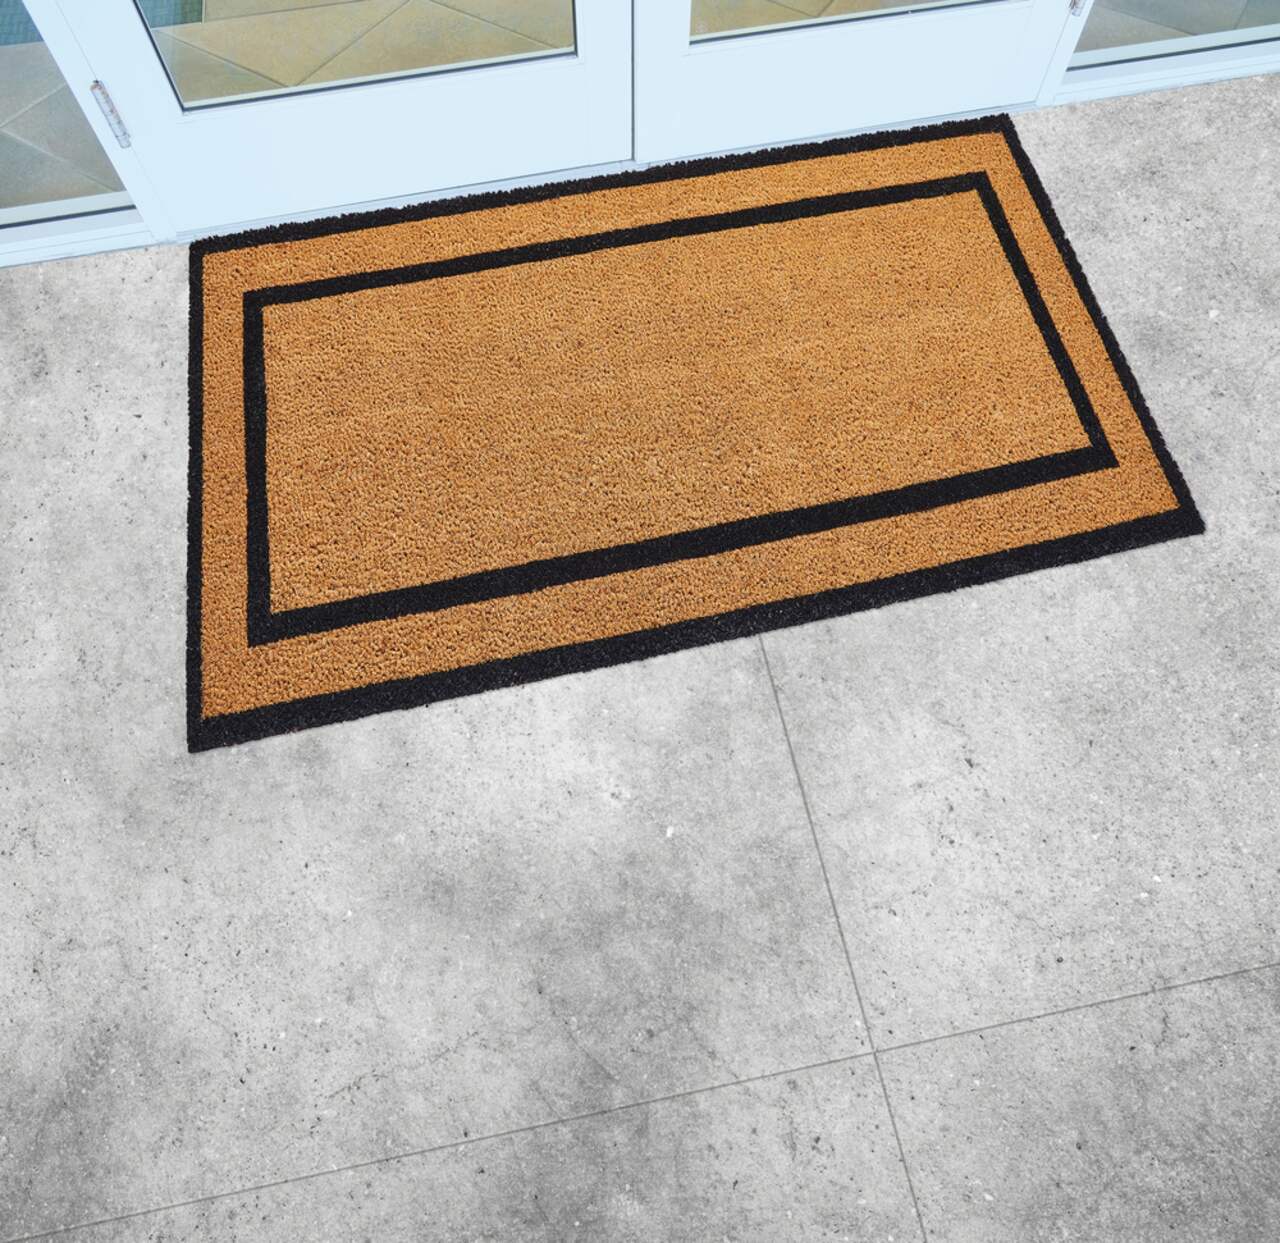 https://media-www.canadiantire.ca/product/living/home-decor/floor-window-decor/0688159/for-living-coir-door-mat-20x48-c16c085e-d6bb-416b-bcc2-1a5af3d7ab0f.png?imdensity=1&imwidth=640&impolicy=mZoom